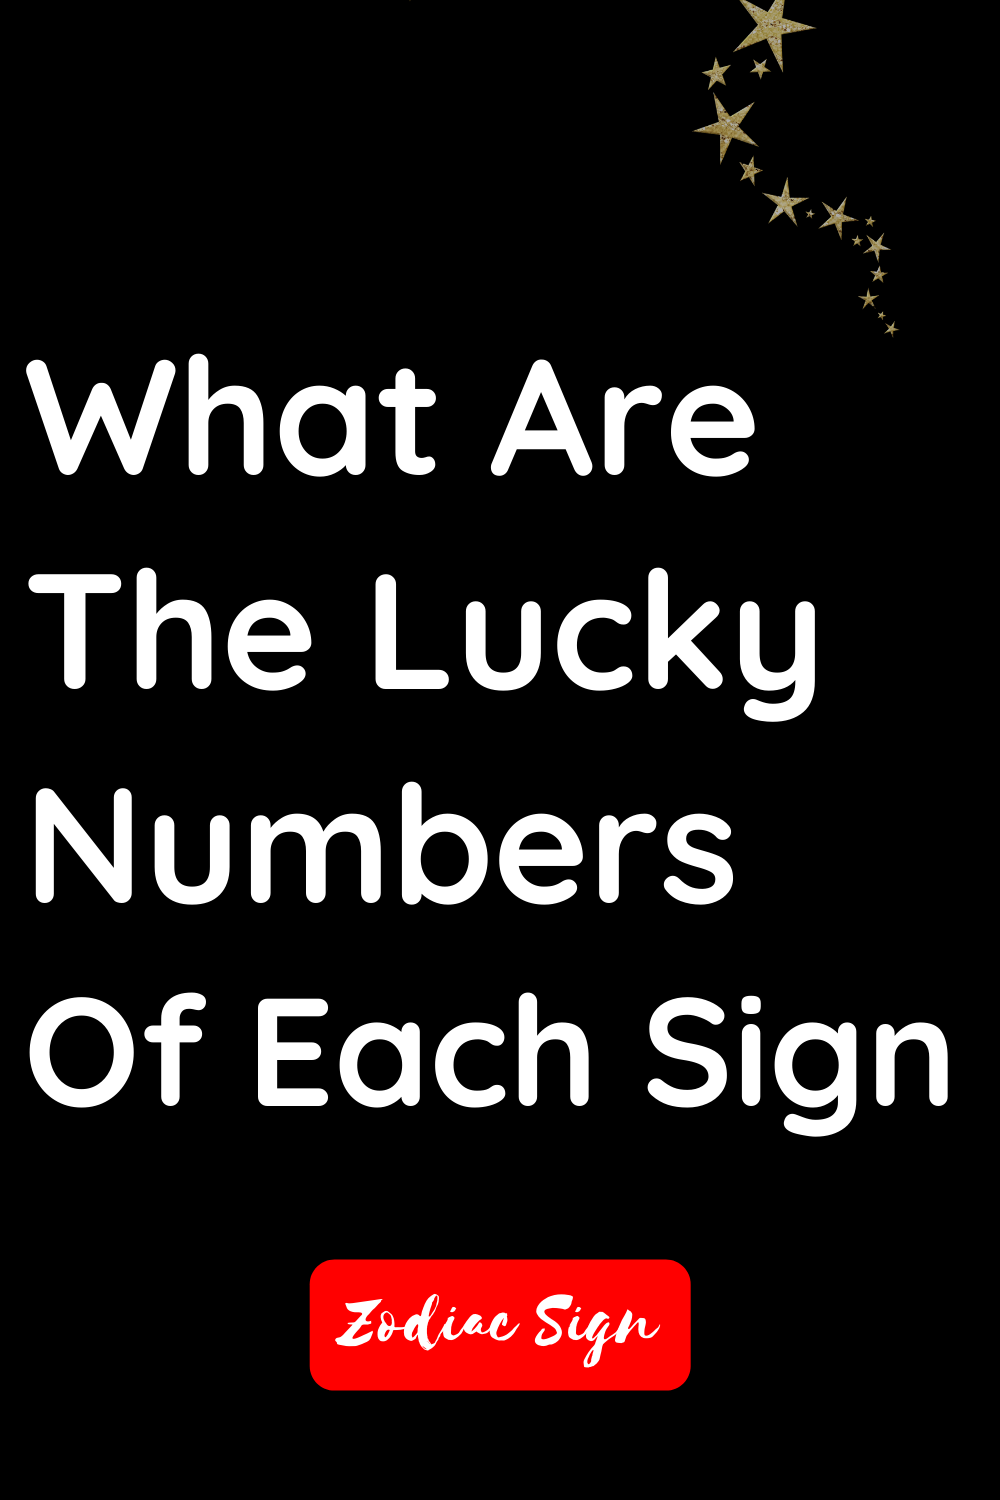 What are the lucky numbers of each sign